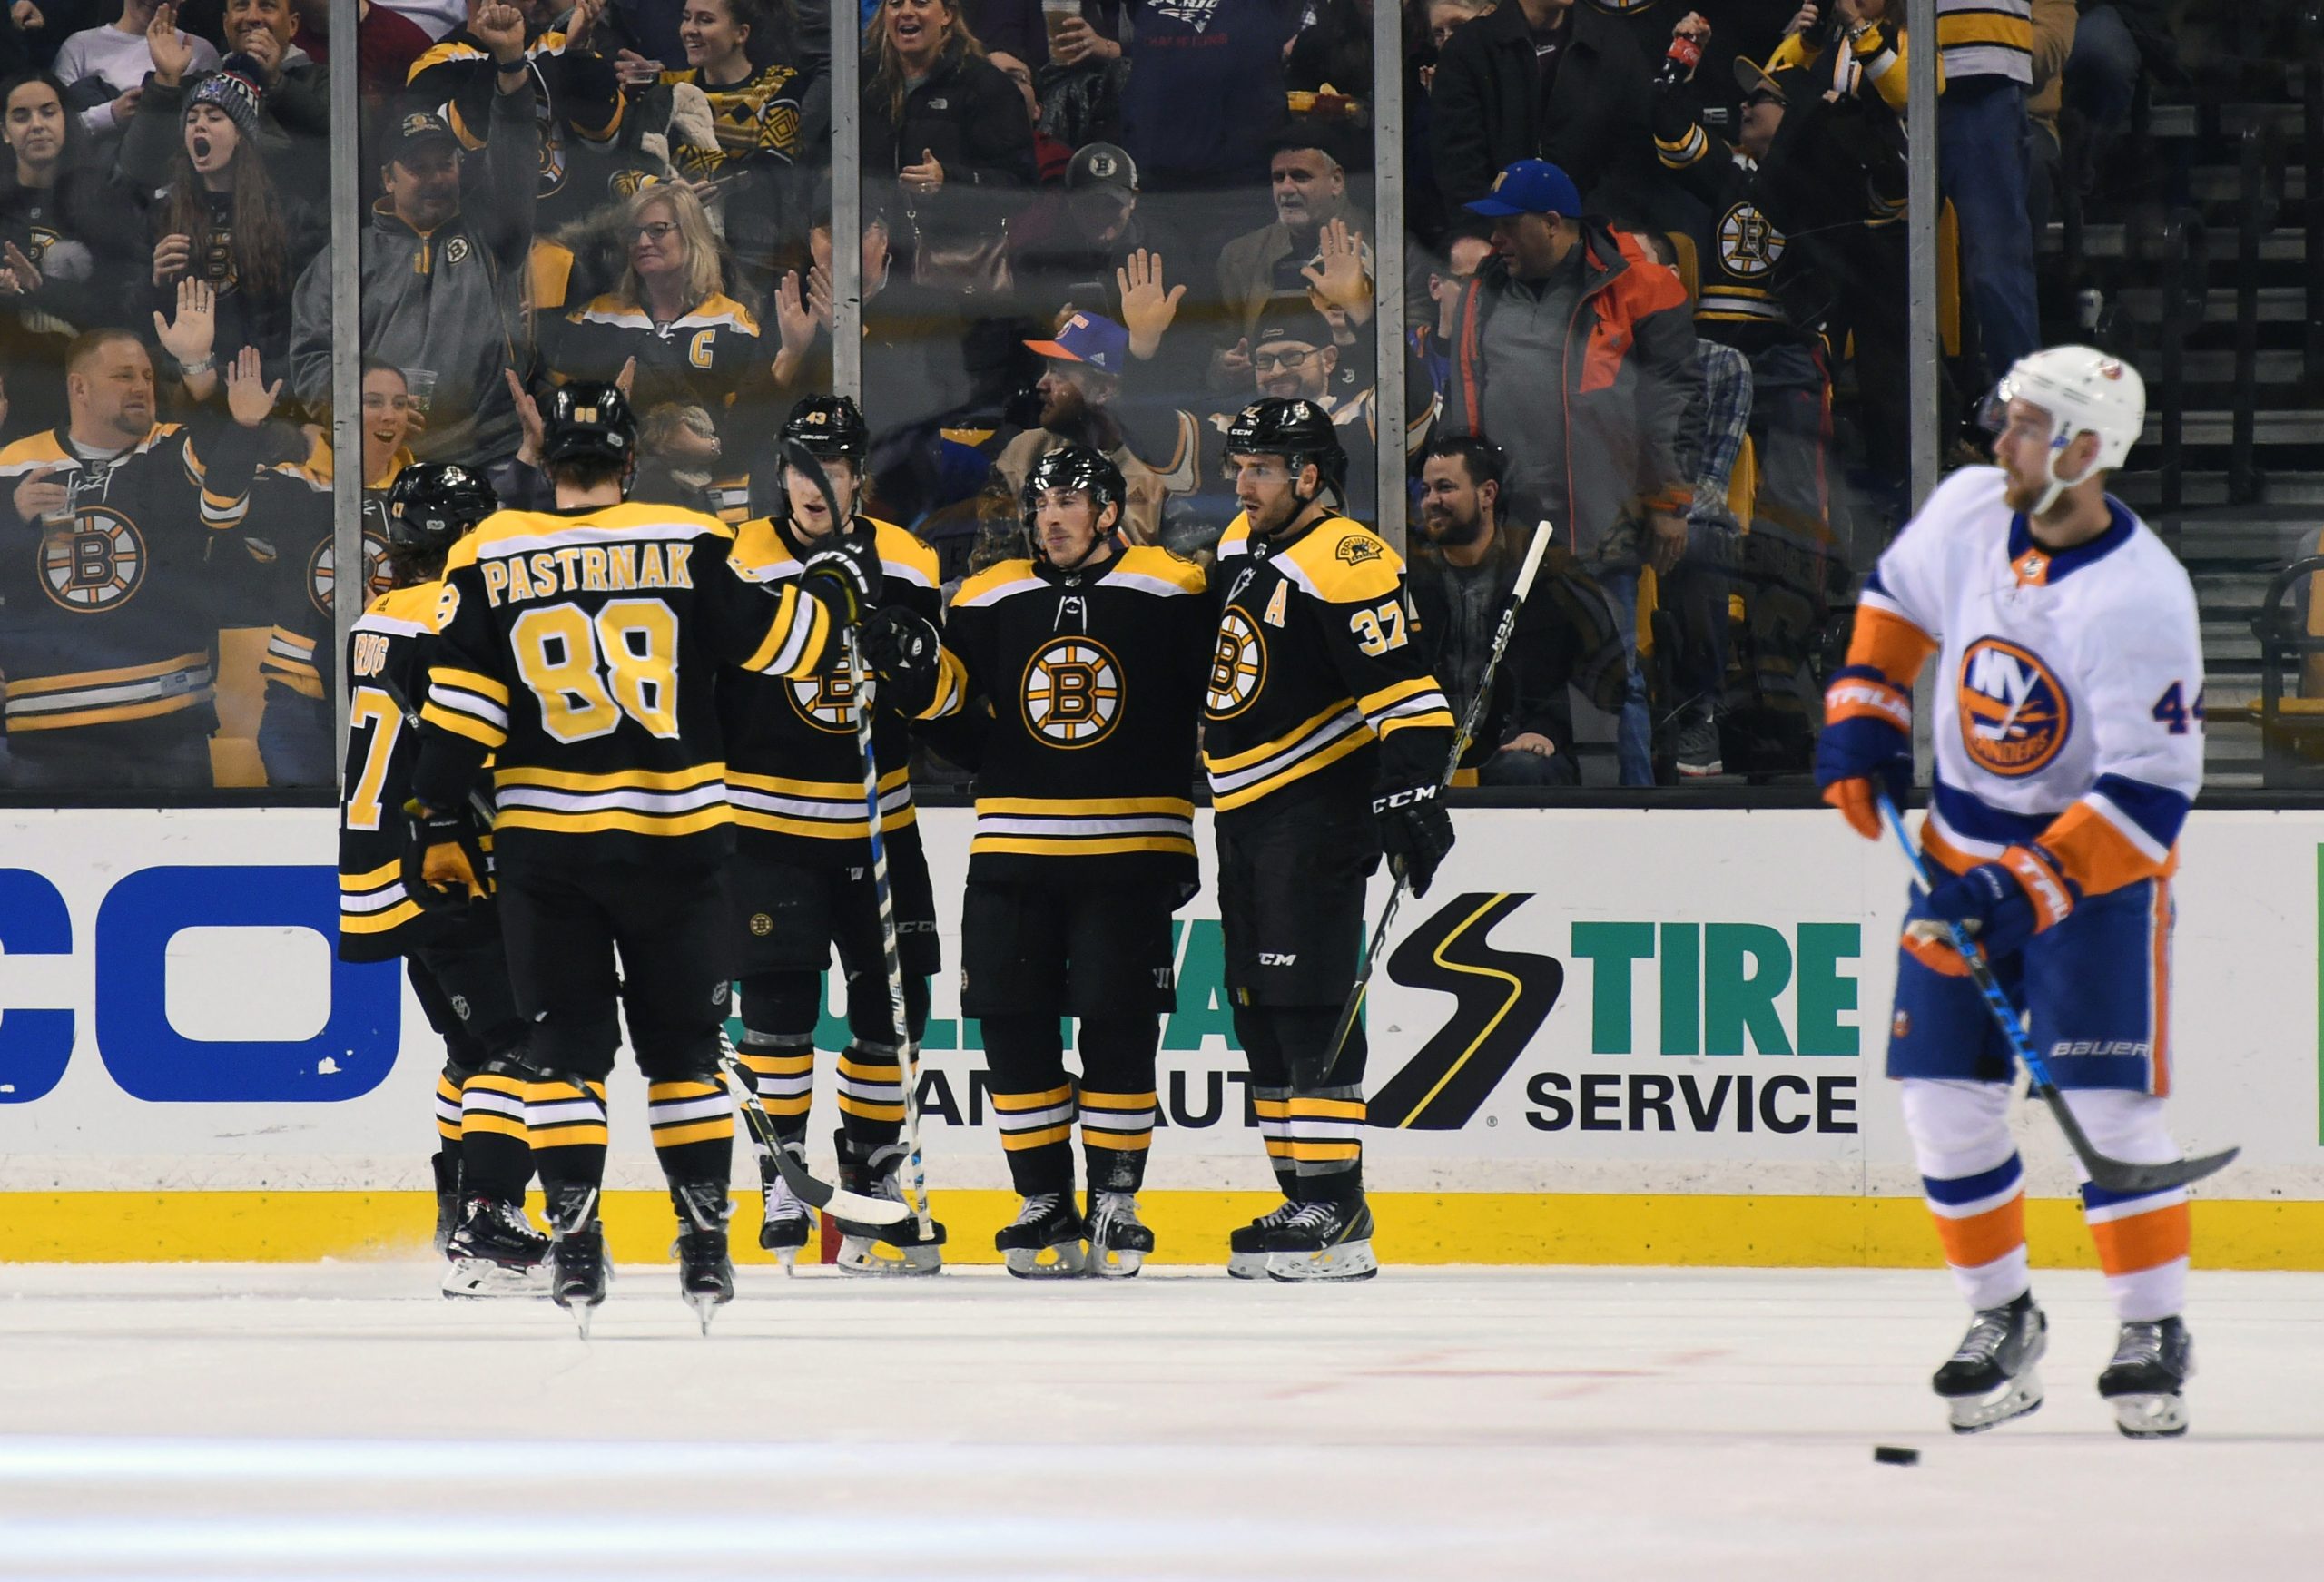 Dec 9, 2017; Boston, MA, USA; Boston Bruins left wing Brad Marchand (63) celebrates with teammates after scoring a goal against the New York Islanders during the second period at TD Garden. Mandatory Credit: Bob DeChiara-USA TODAY Sports